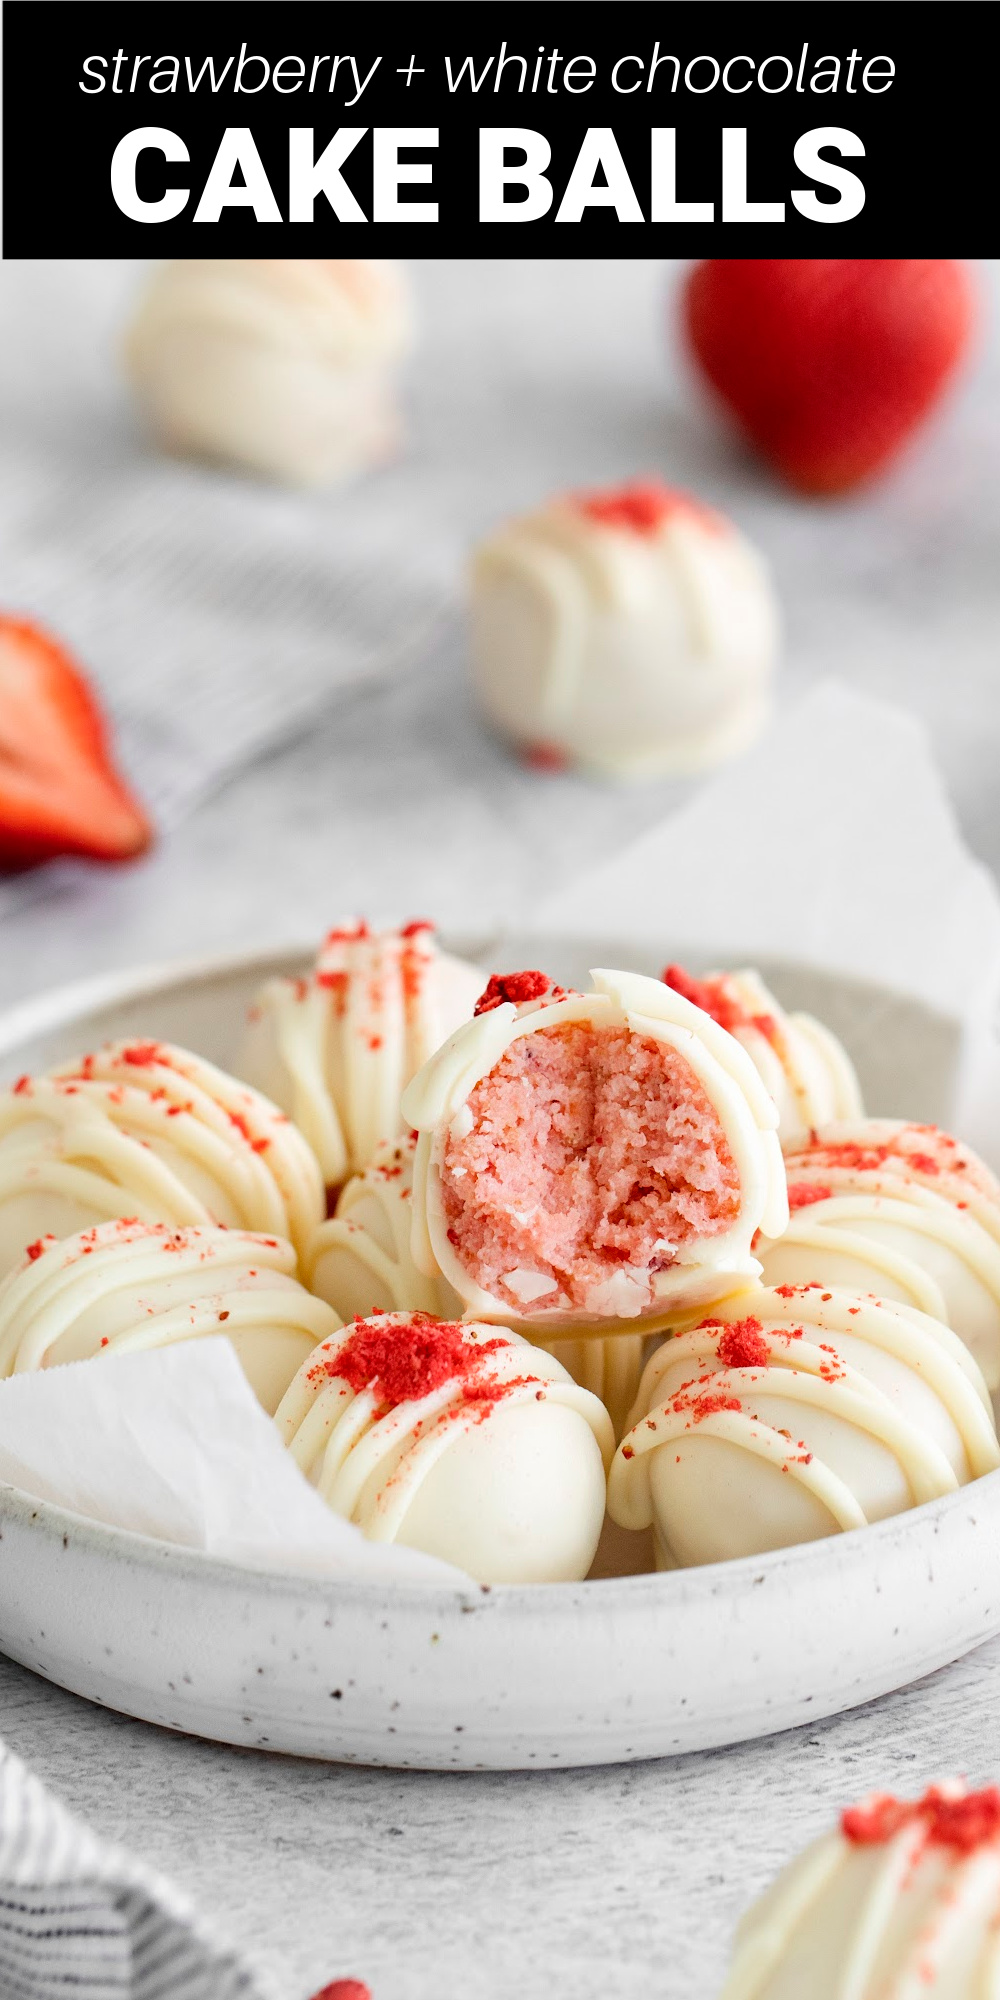 These truffle like Strawberry Cake Balls are the perfect bite-sized dessert with a soft and chewy center and a white chocolate shell. Loaded with rich strawberry flavor.